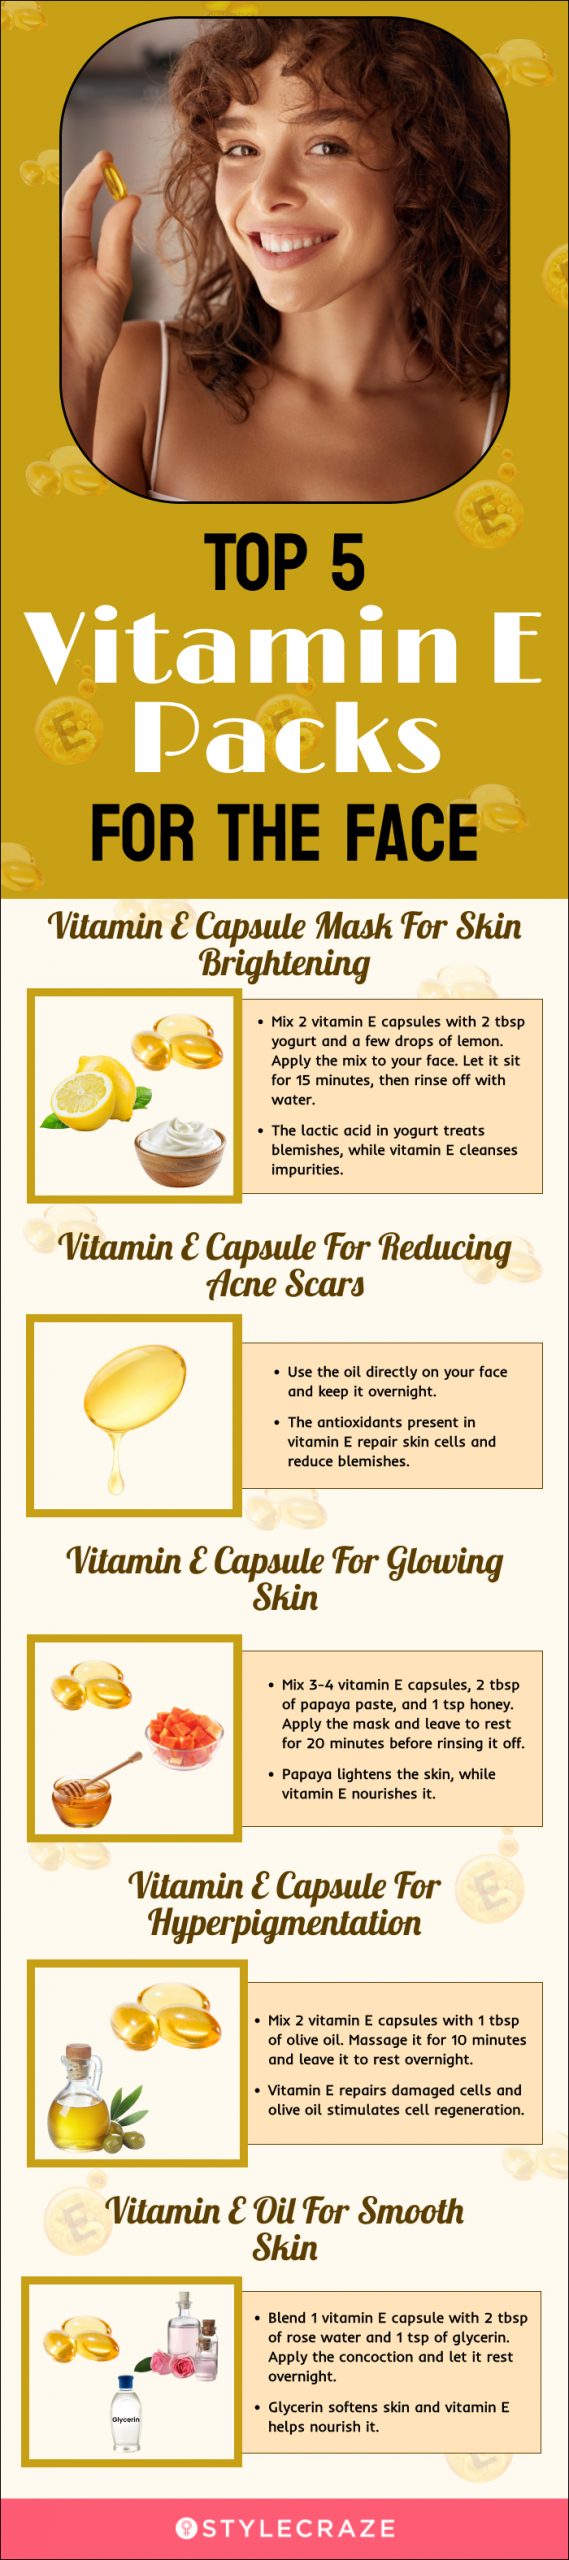 Vitamin E Capsule For Skin: Benefits And How To Use On Face